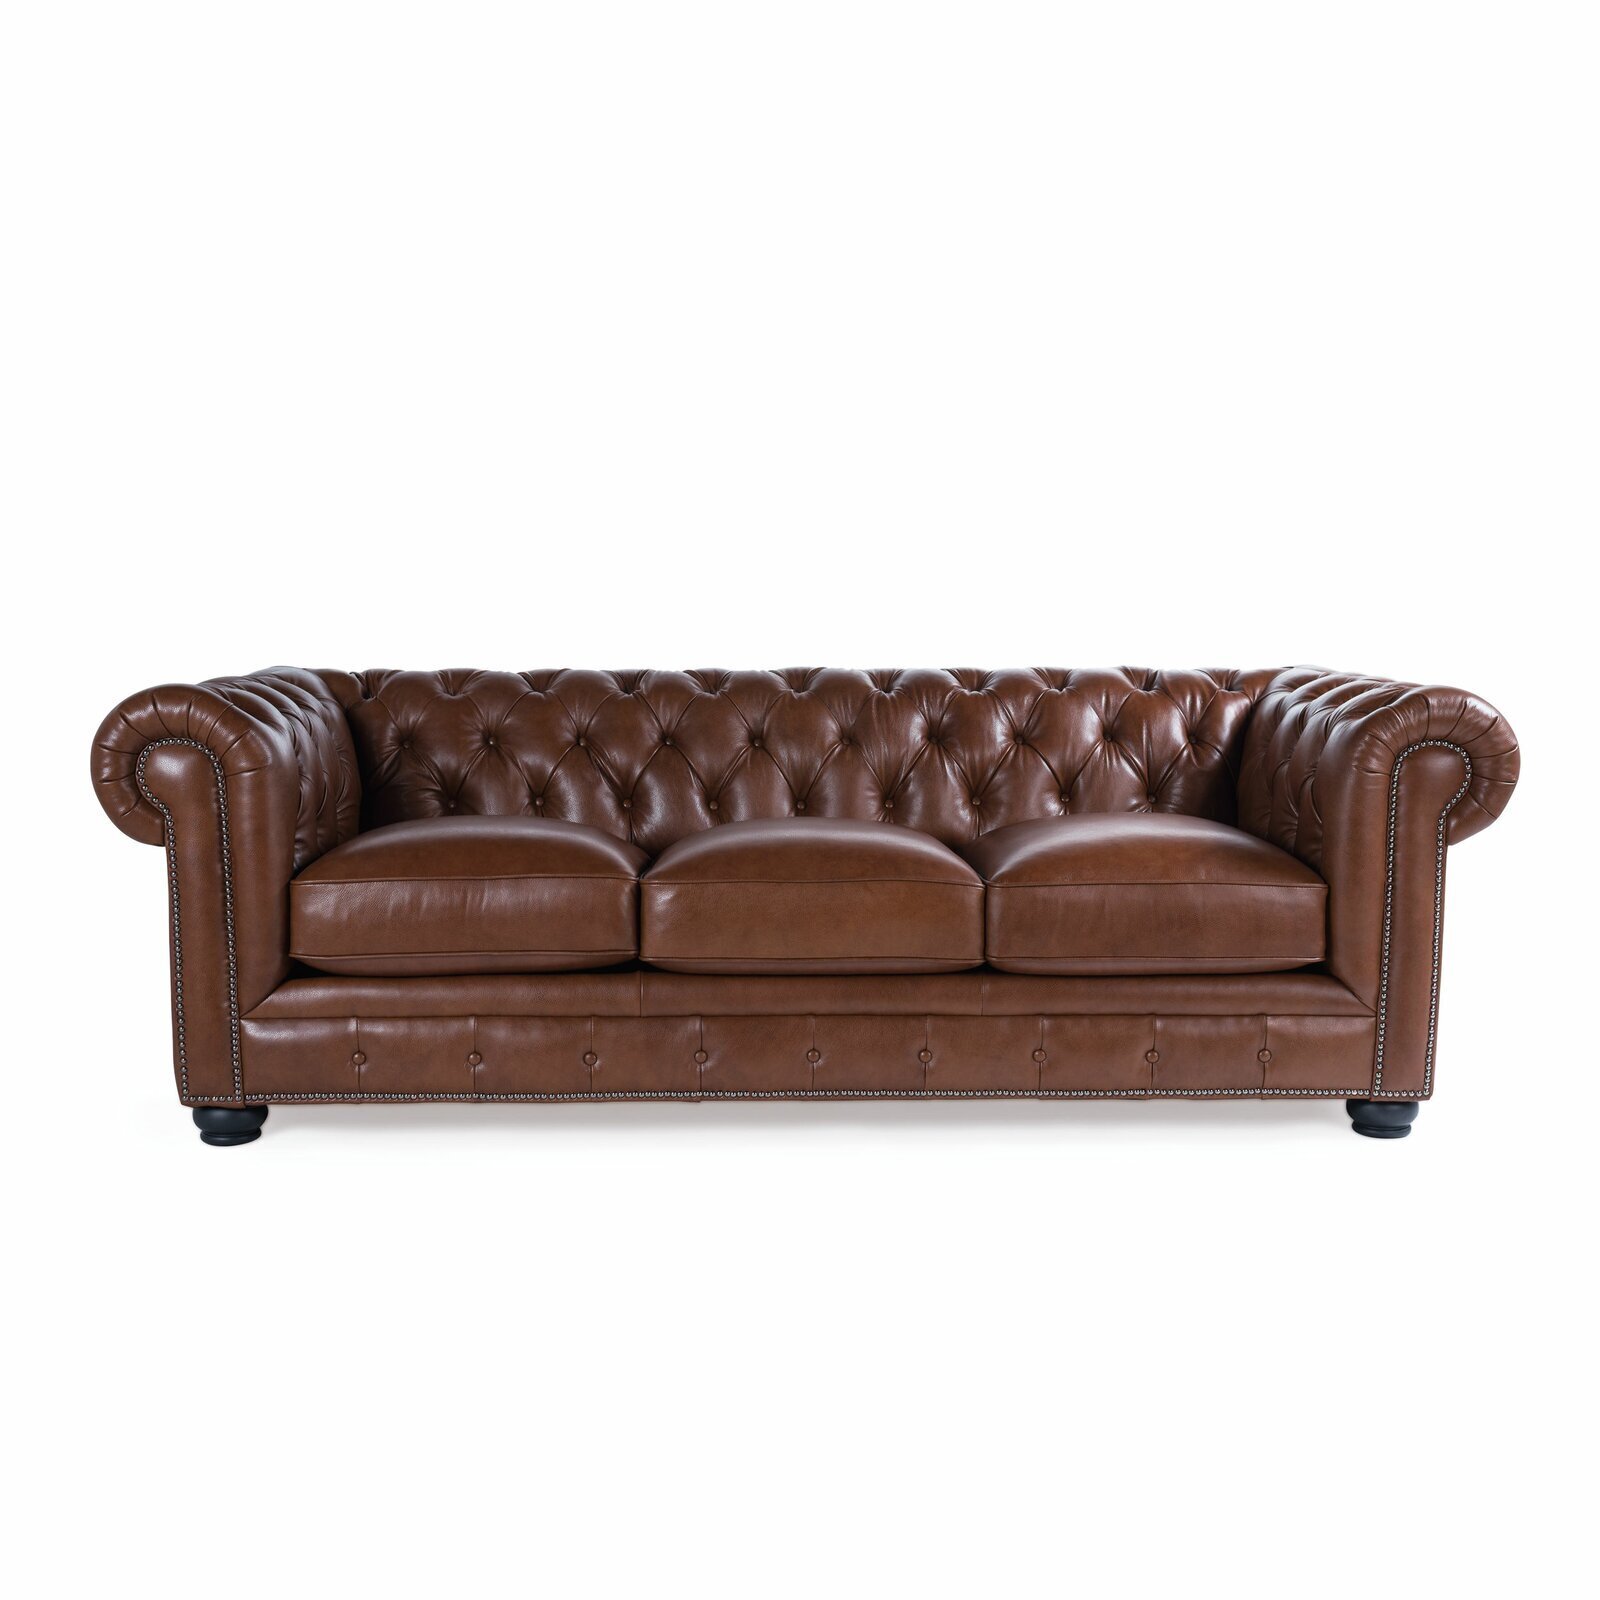 Leather Chesterfield Colonial Style Sofa